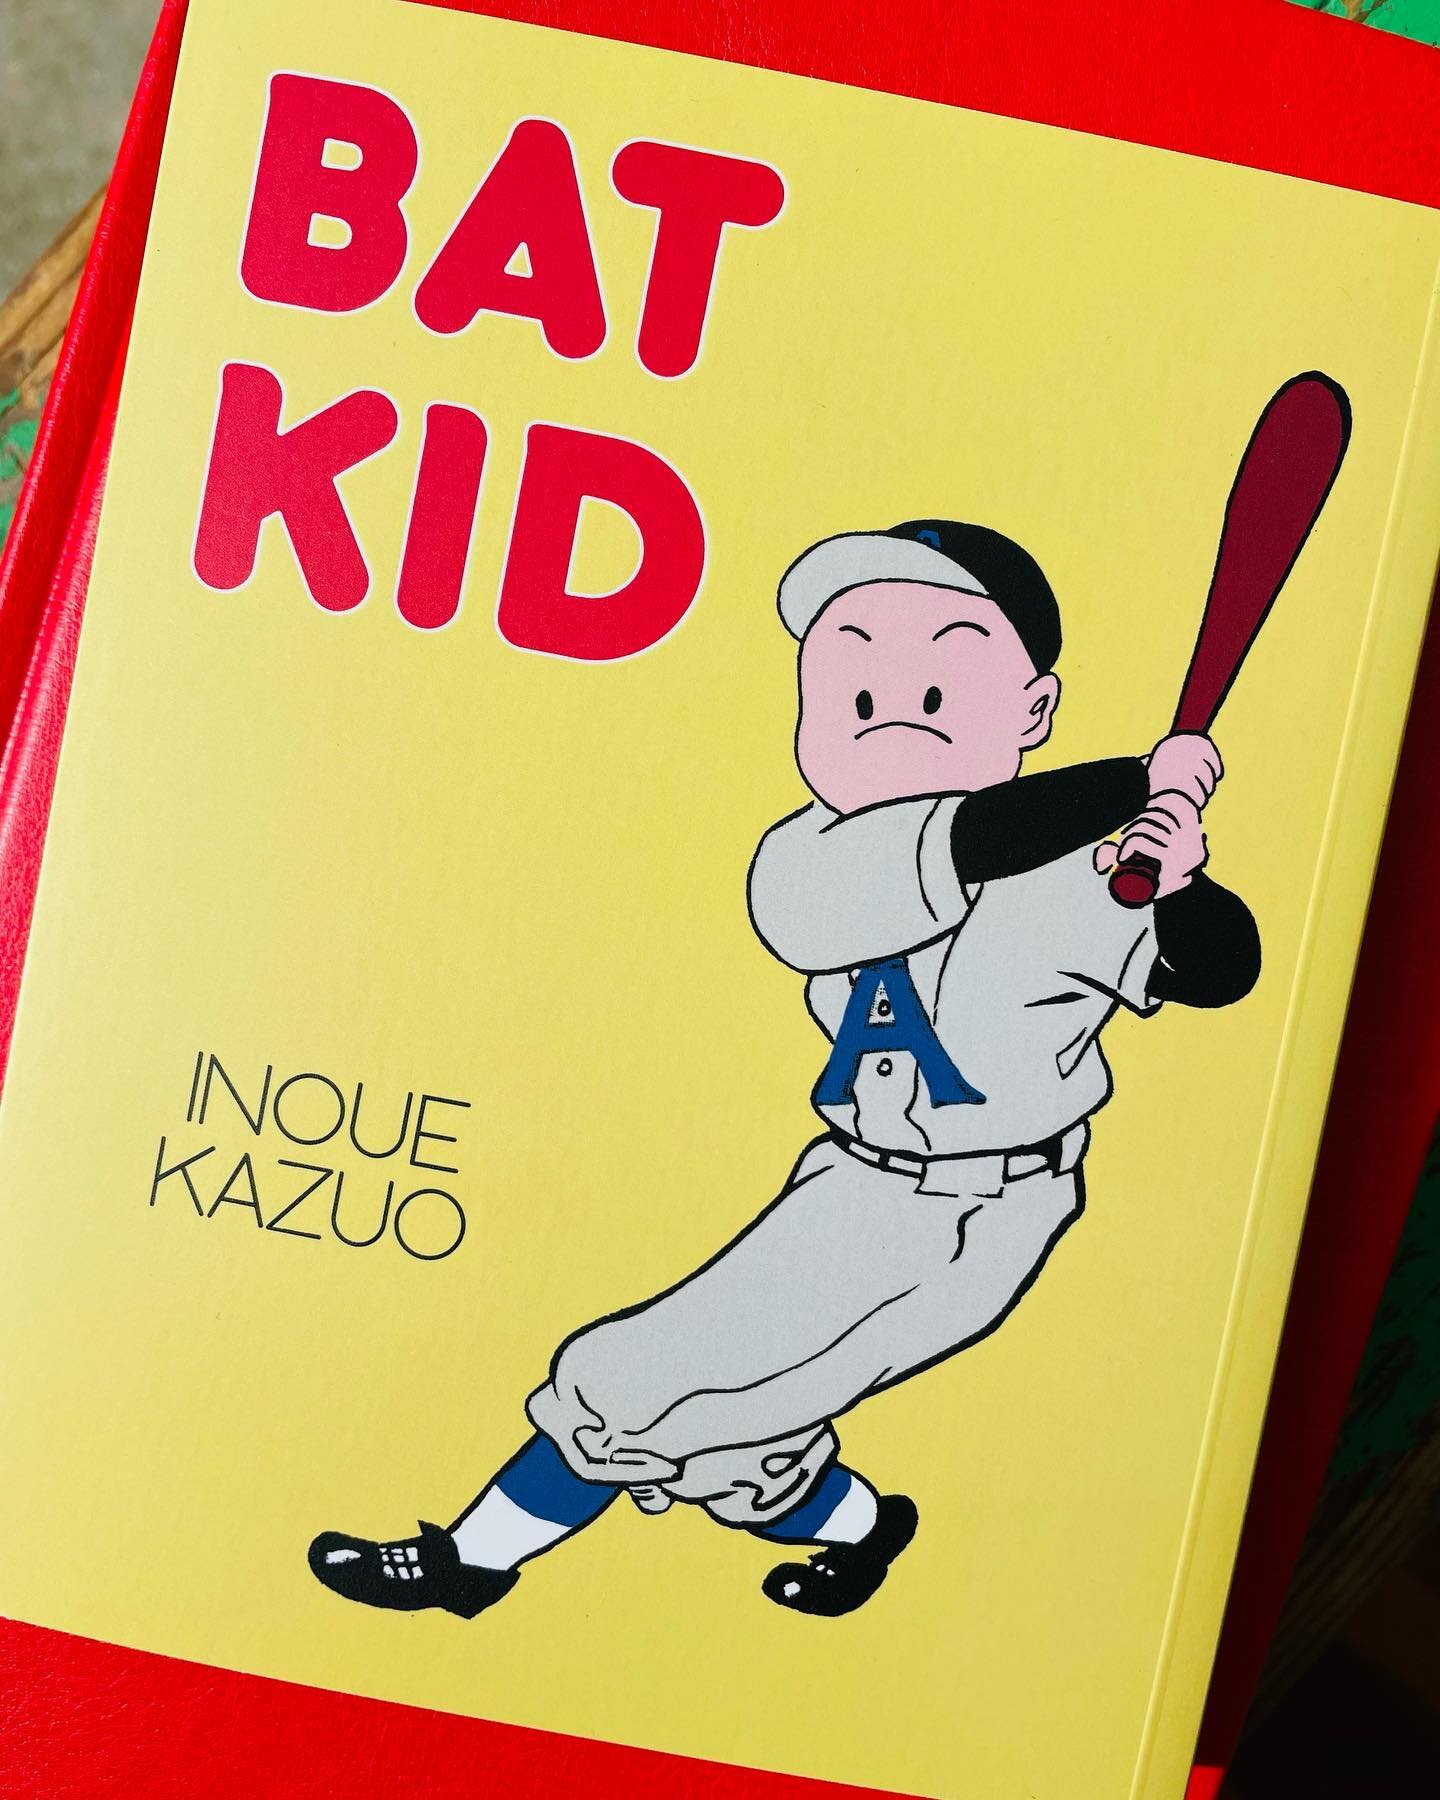 Just arrived for Opening Day⚾️ Inoue Kazuo&rsquo;s BAT KID back in stock. And new in stock: Fukui Eiichi&rsquo;s IGAGURI: YOUNG JUDO MASTER! Thanks @bubbles_zine! 

OPEN TODAY 3PM - 7PM❤️

Your new local Manga shop
NOW OPEN

mangacincinnati.com

Plea